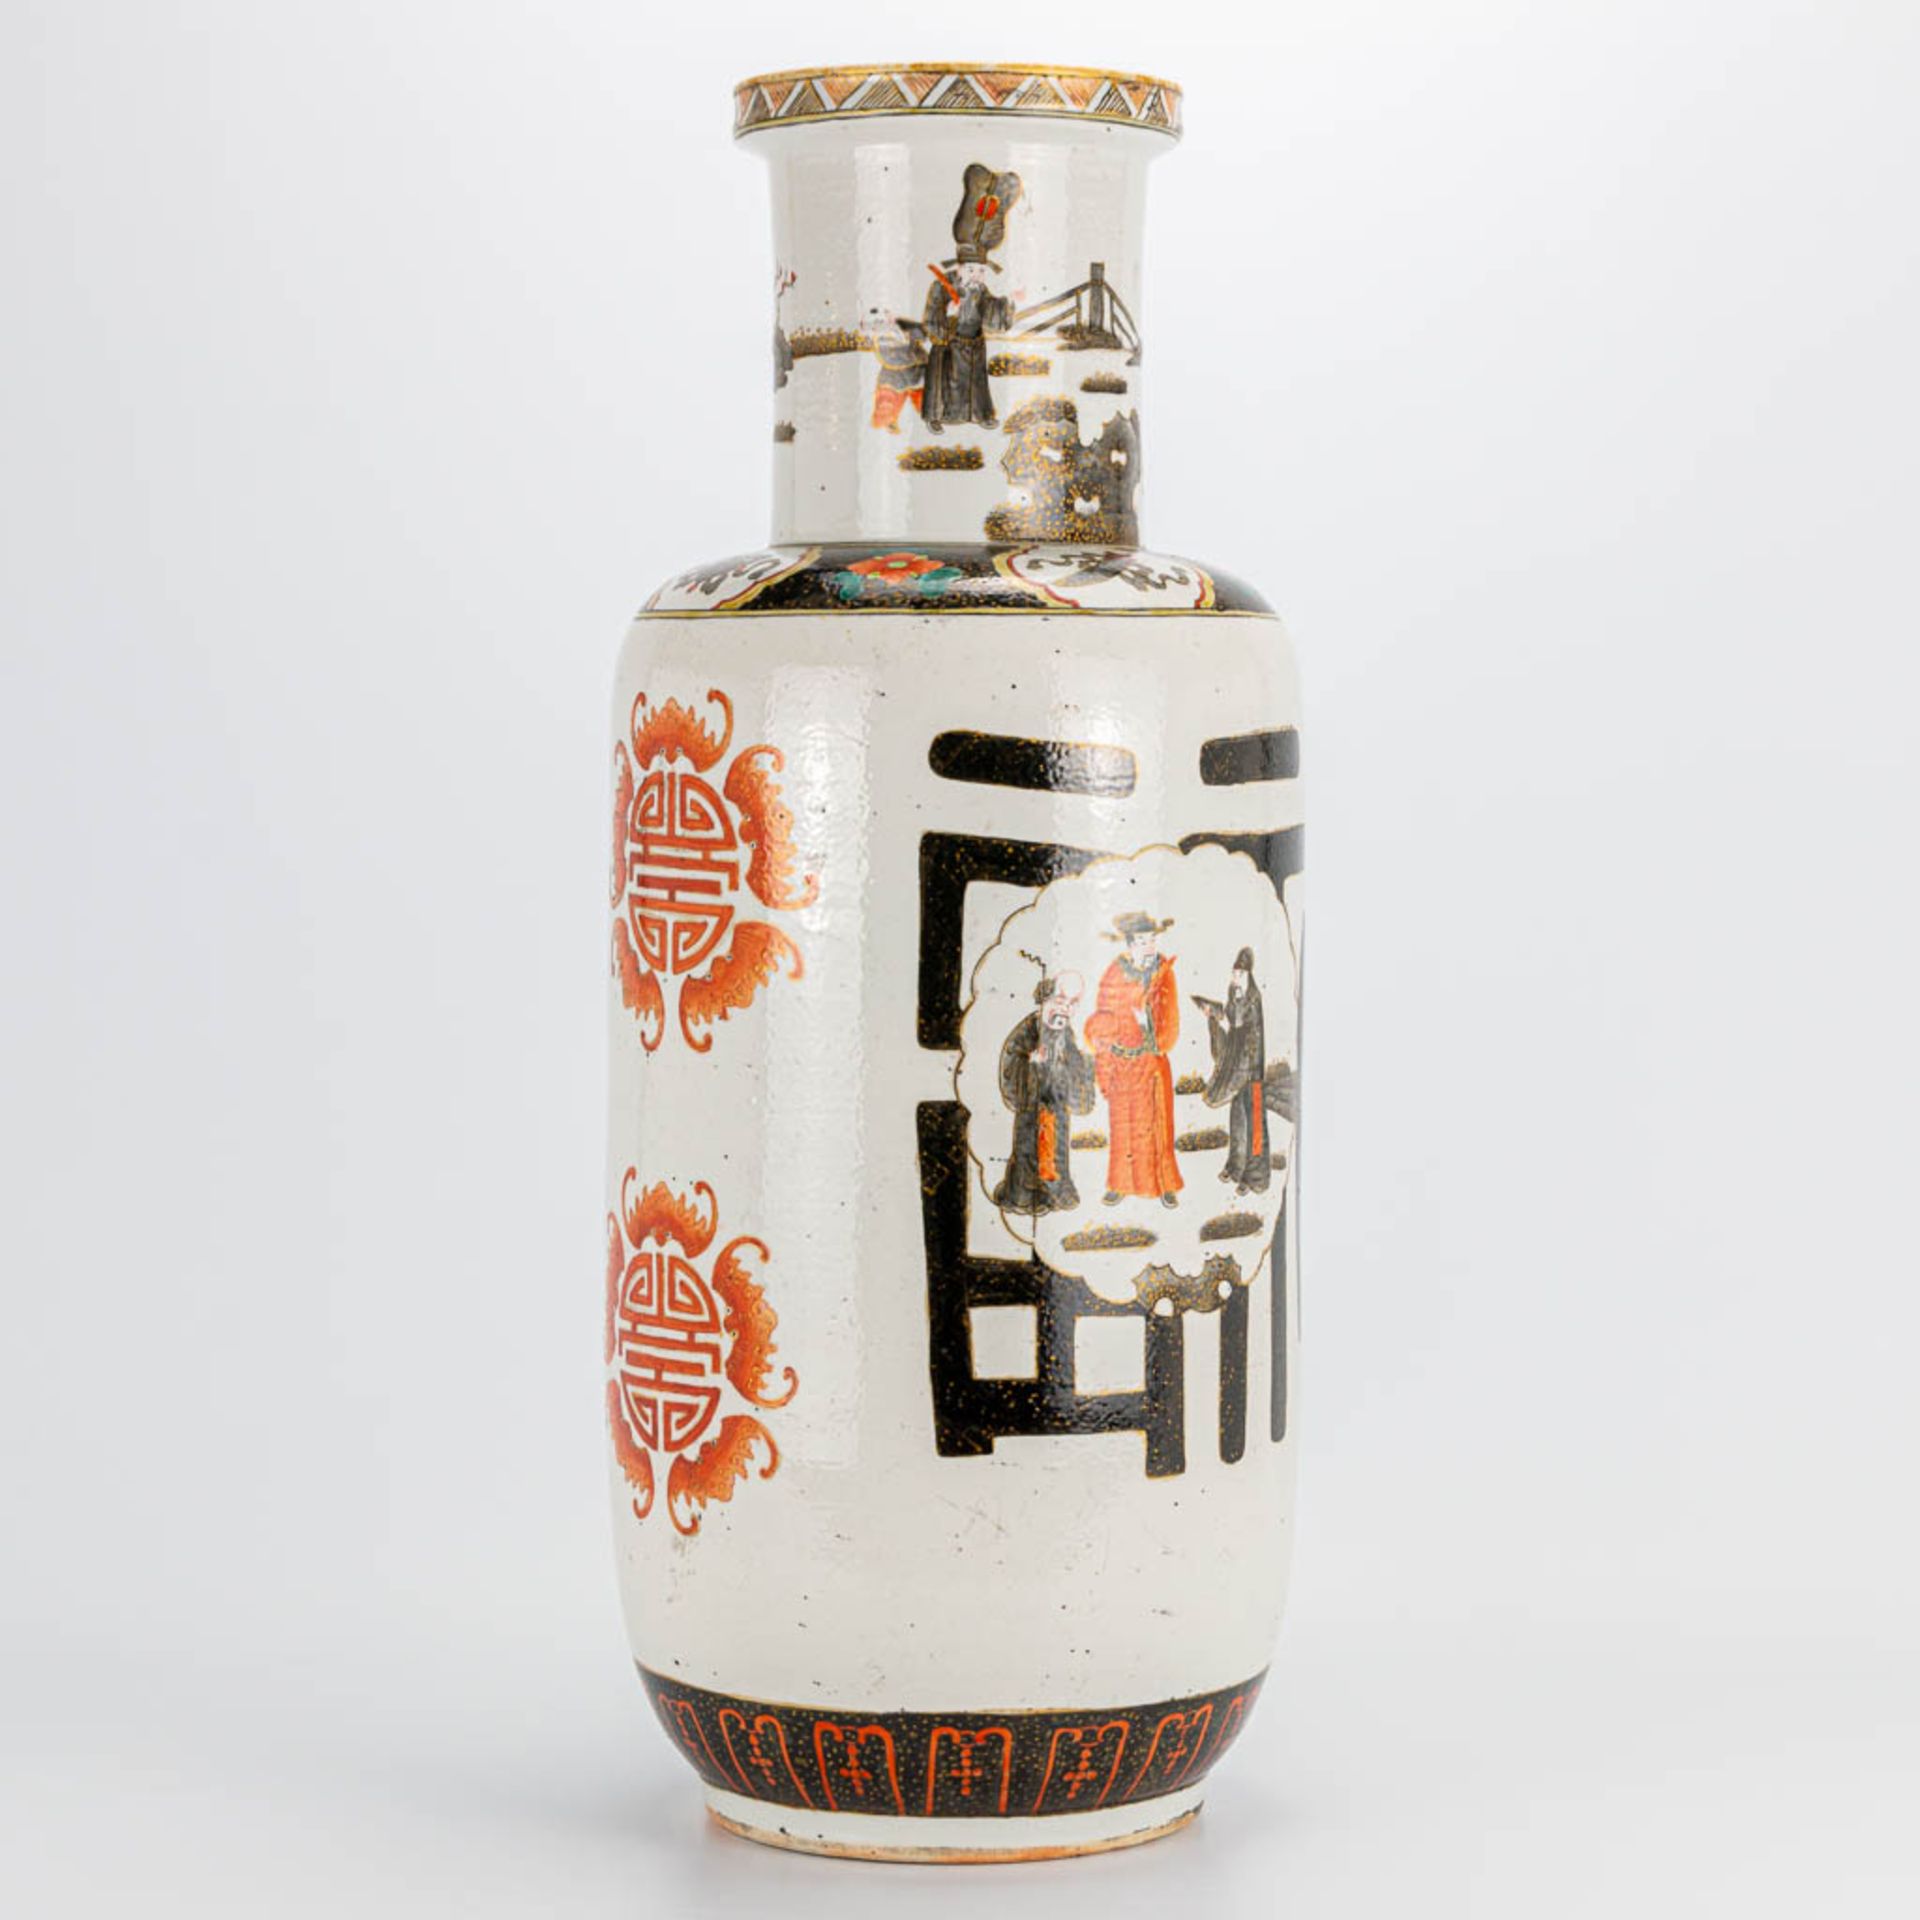 A Chinese vase with decor of wise men and calligraphic texts. 19th/20th century. (54 x 21 cm) - Image 3 of 21